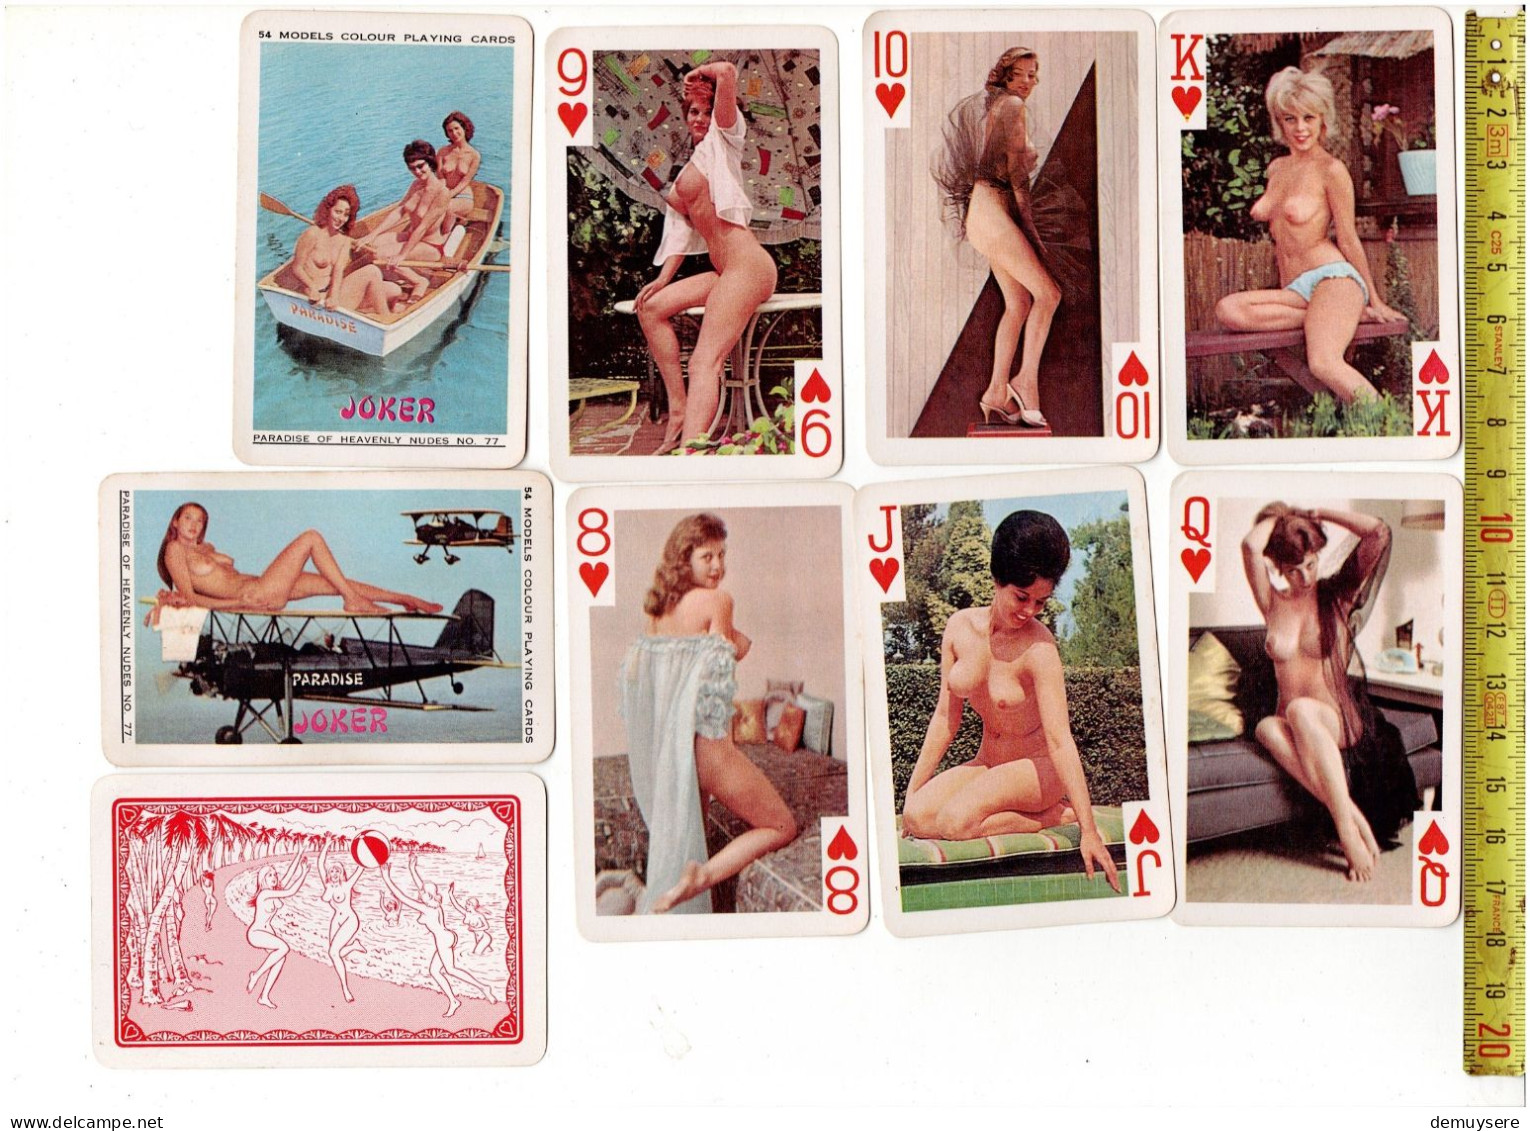 54 MODELS COLOUR PLAYING CARDS - PARADISE OF HEAVENLY NUDES NO 77 - Speelkaarten